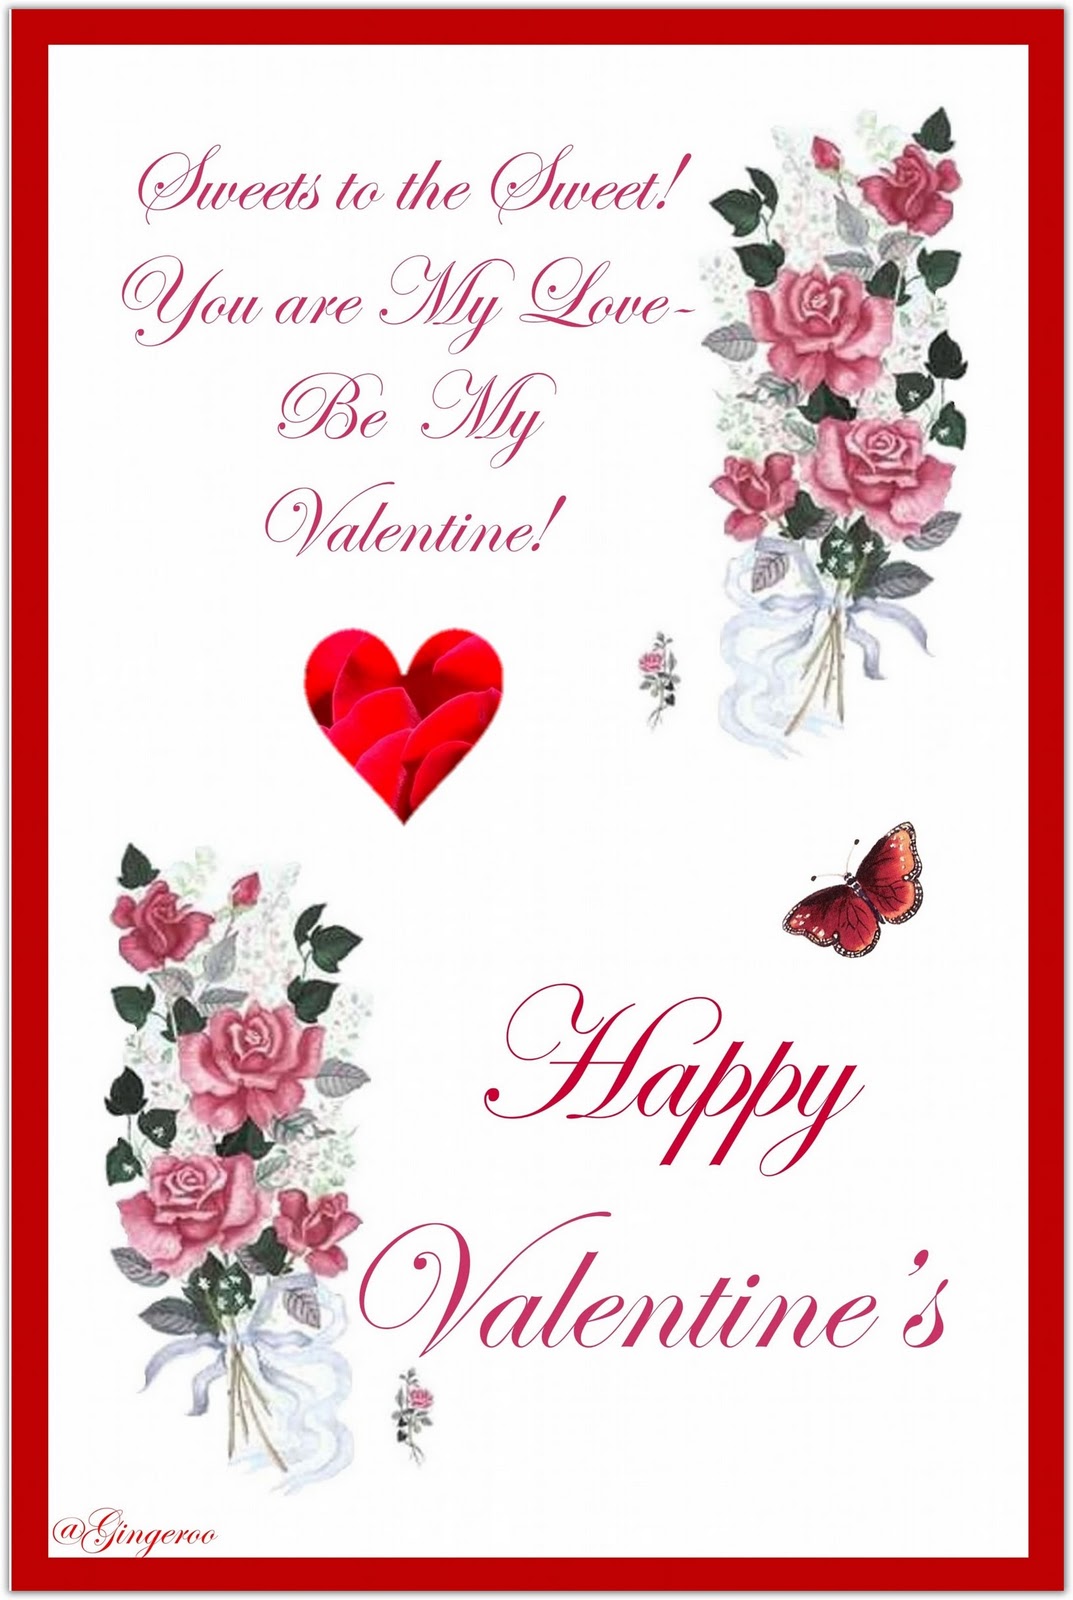 01 Birthday Wishes: The Valentine's Day Card - What is It's History?